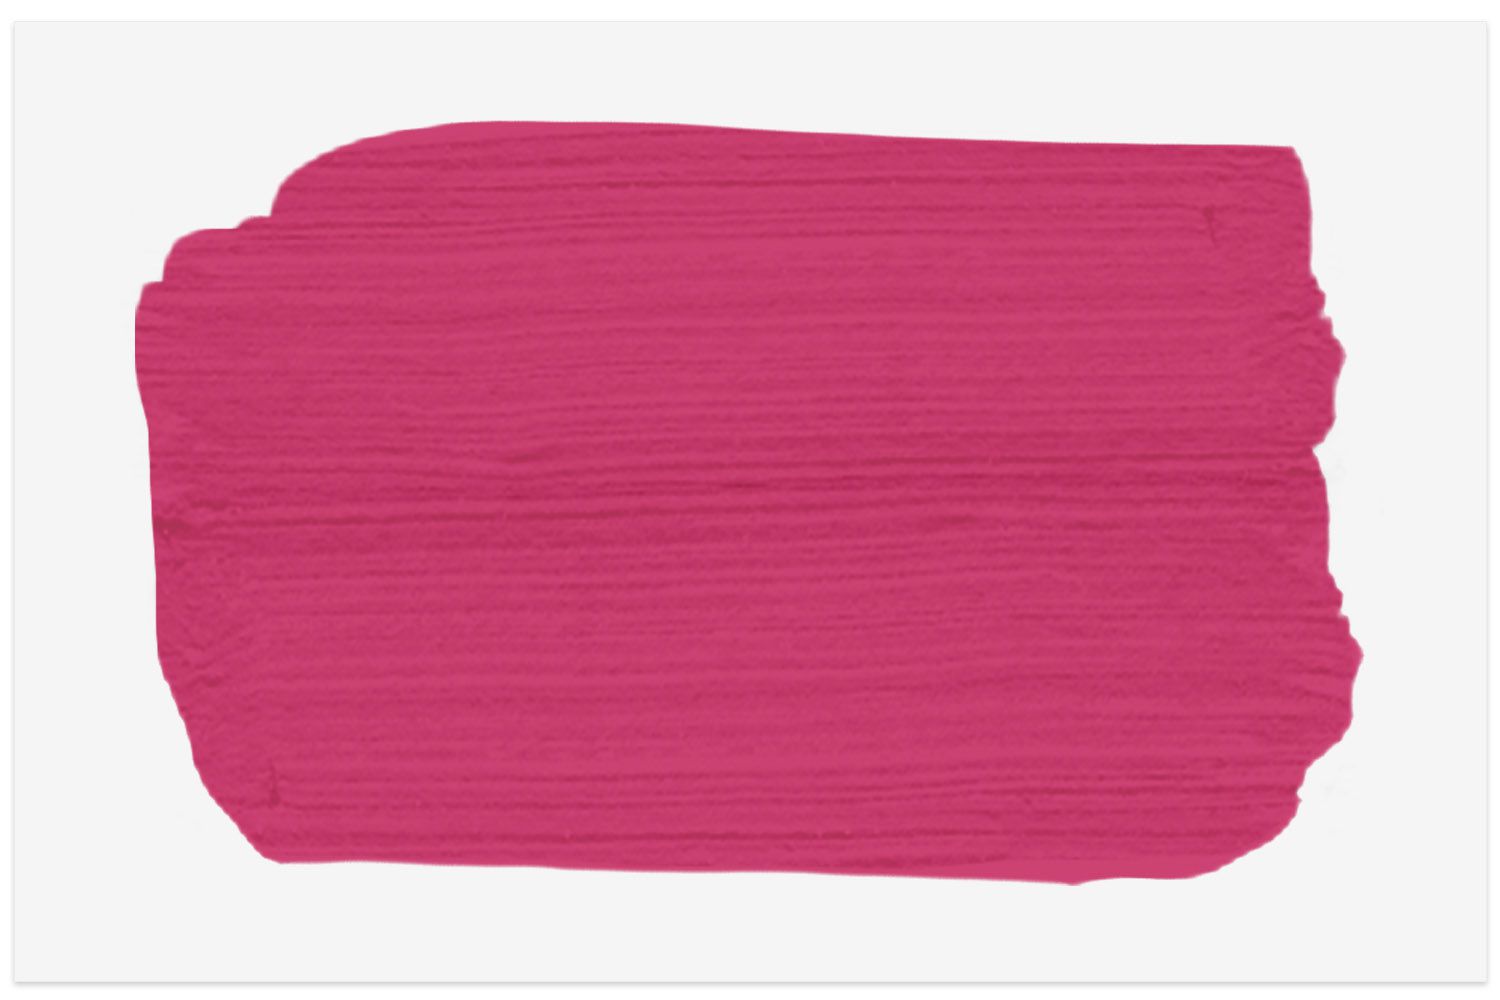 Peony paint swatch from Benjamin Moore